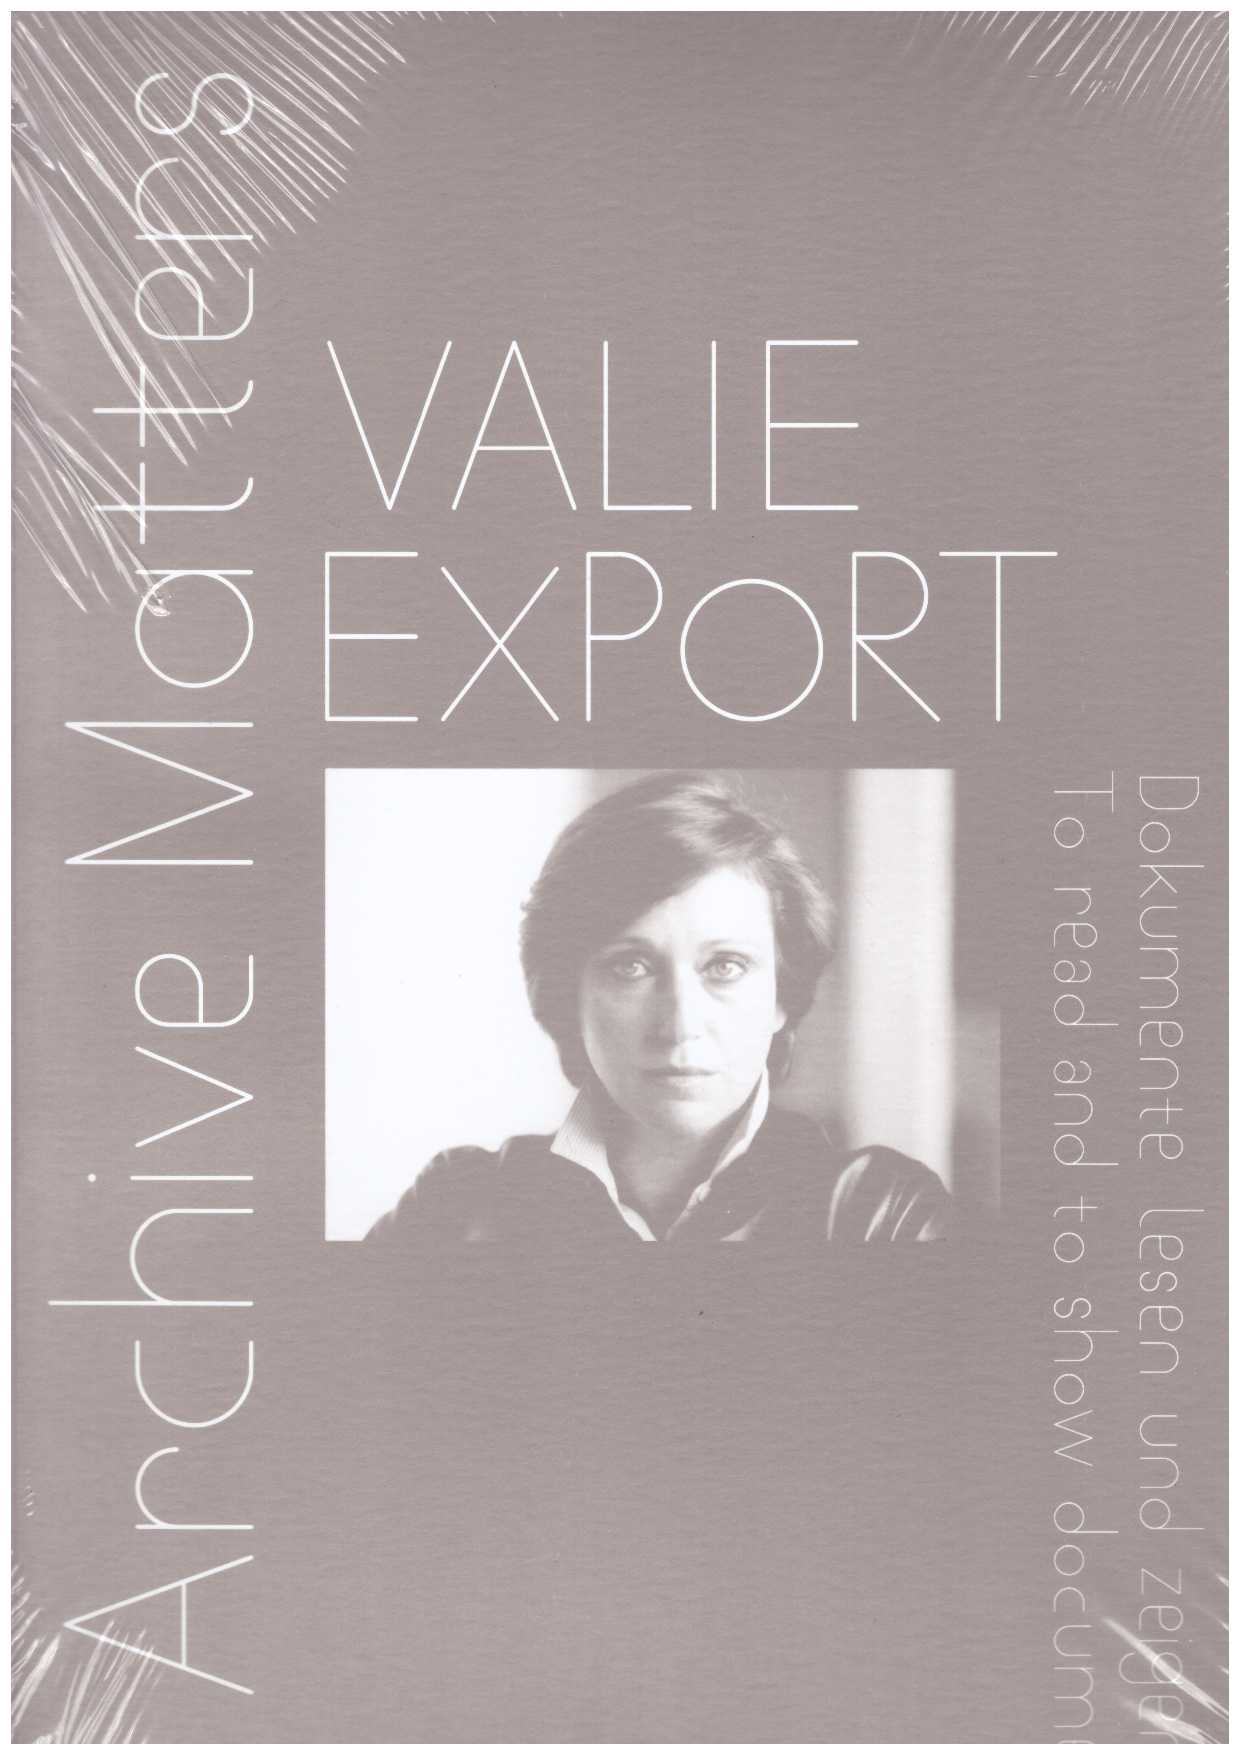 EXPORT, Valerie - Valie Export. Archive Matters. To read and to show documents